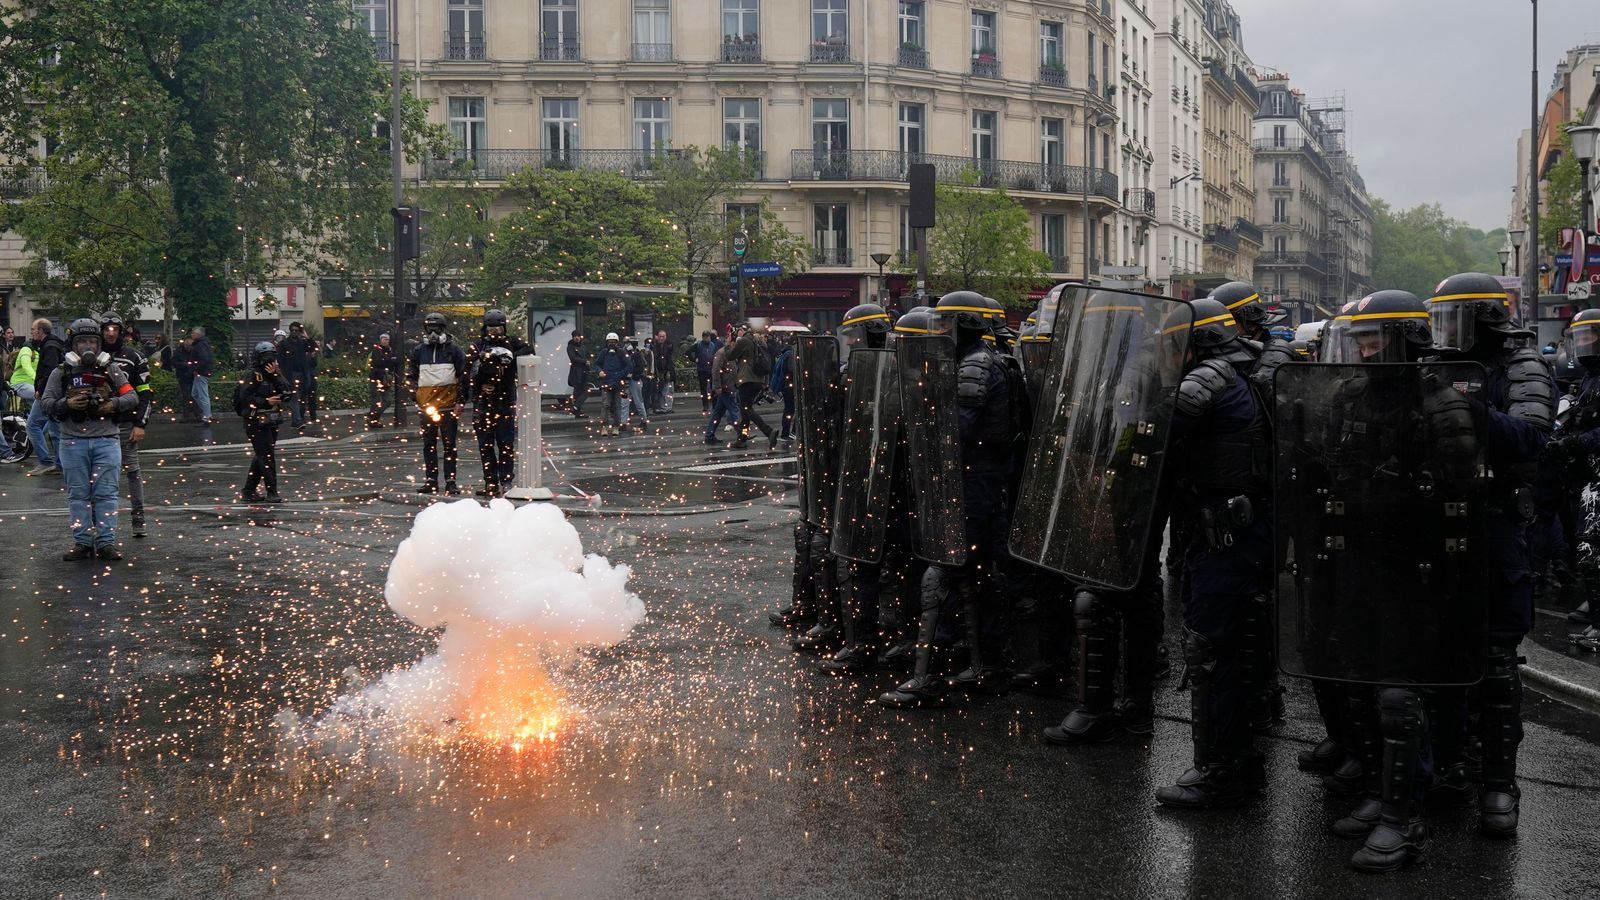 France protests: More than 60 arrested and one police officer injured by Molotov cocktail in clashes